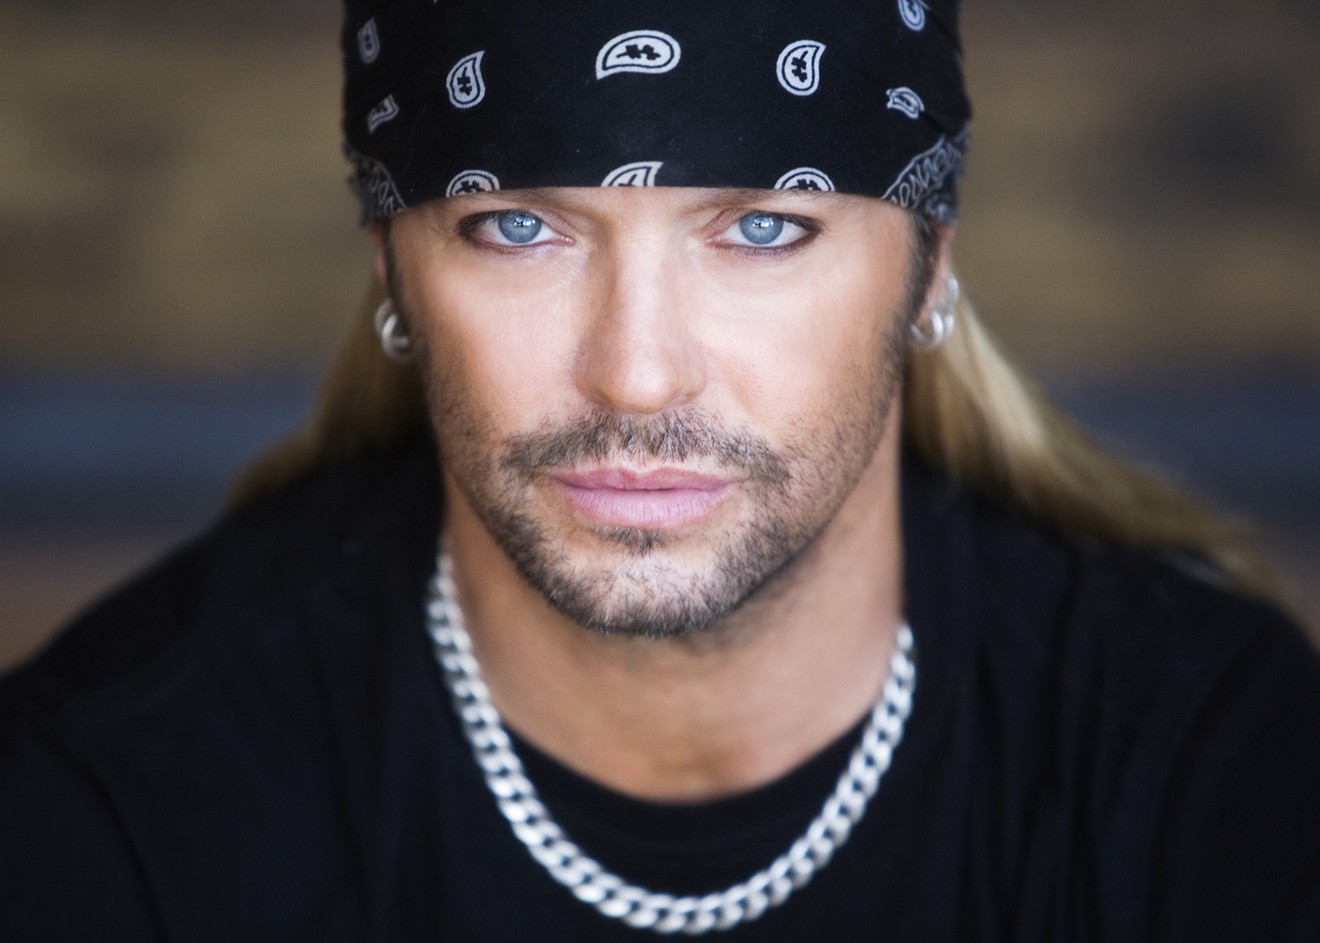 Bret Michaels rocks the Intracoastal as Grand Marshal of the annual Winterfest Boat Parade on December 14.